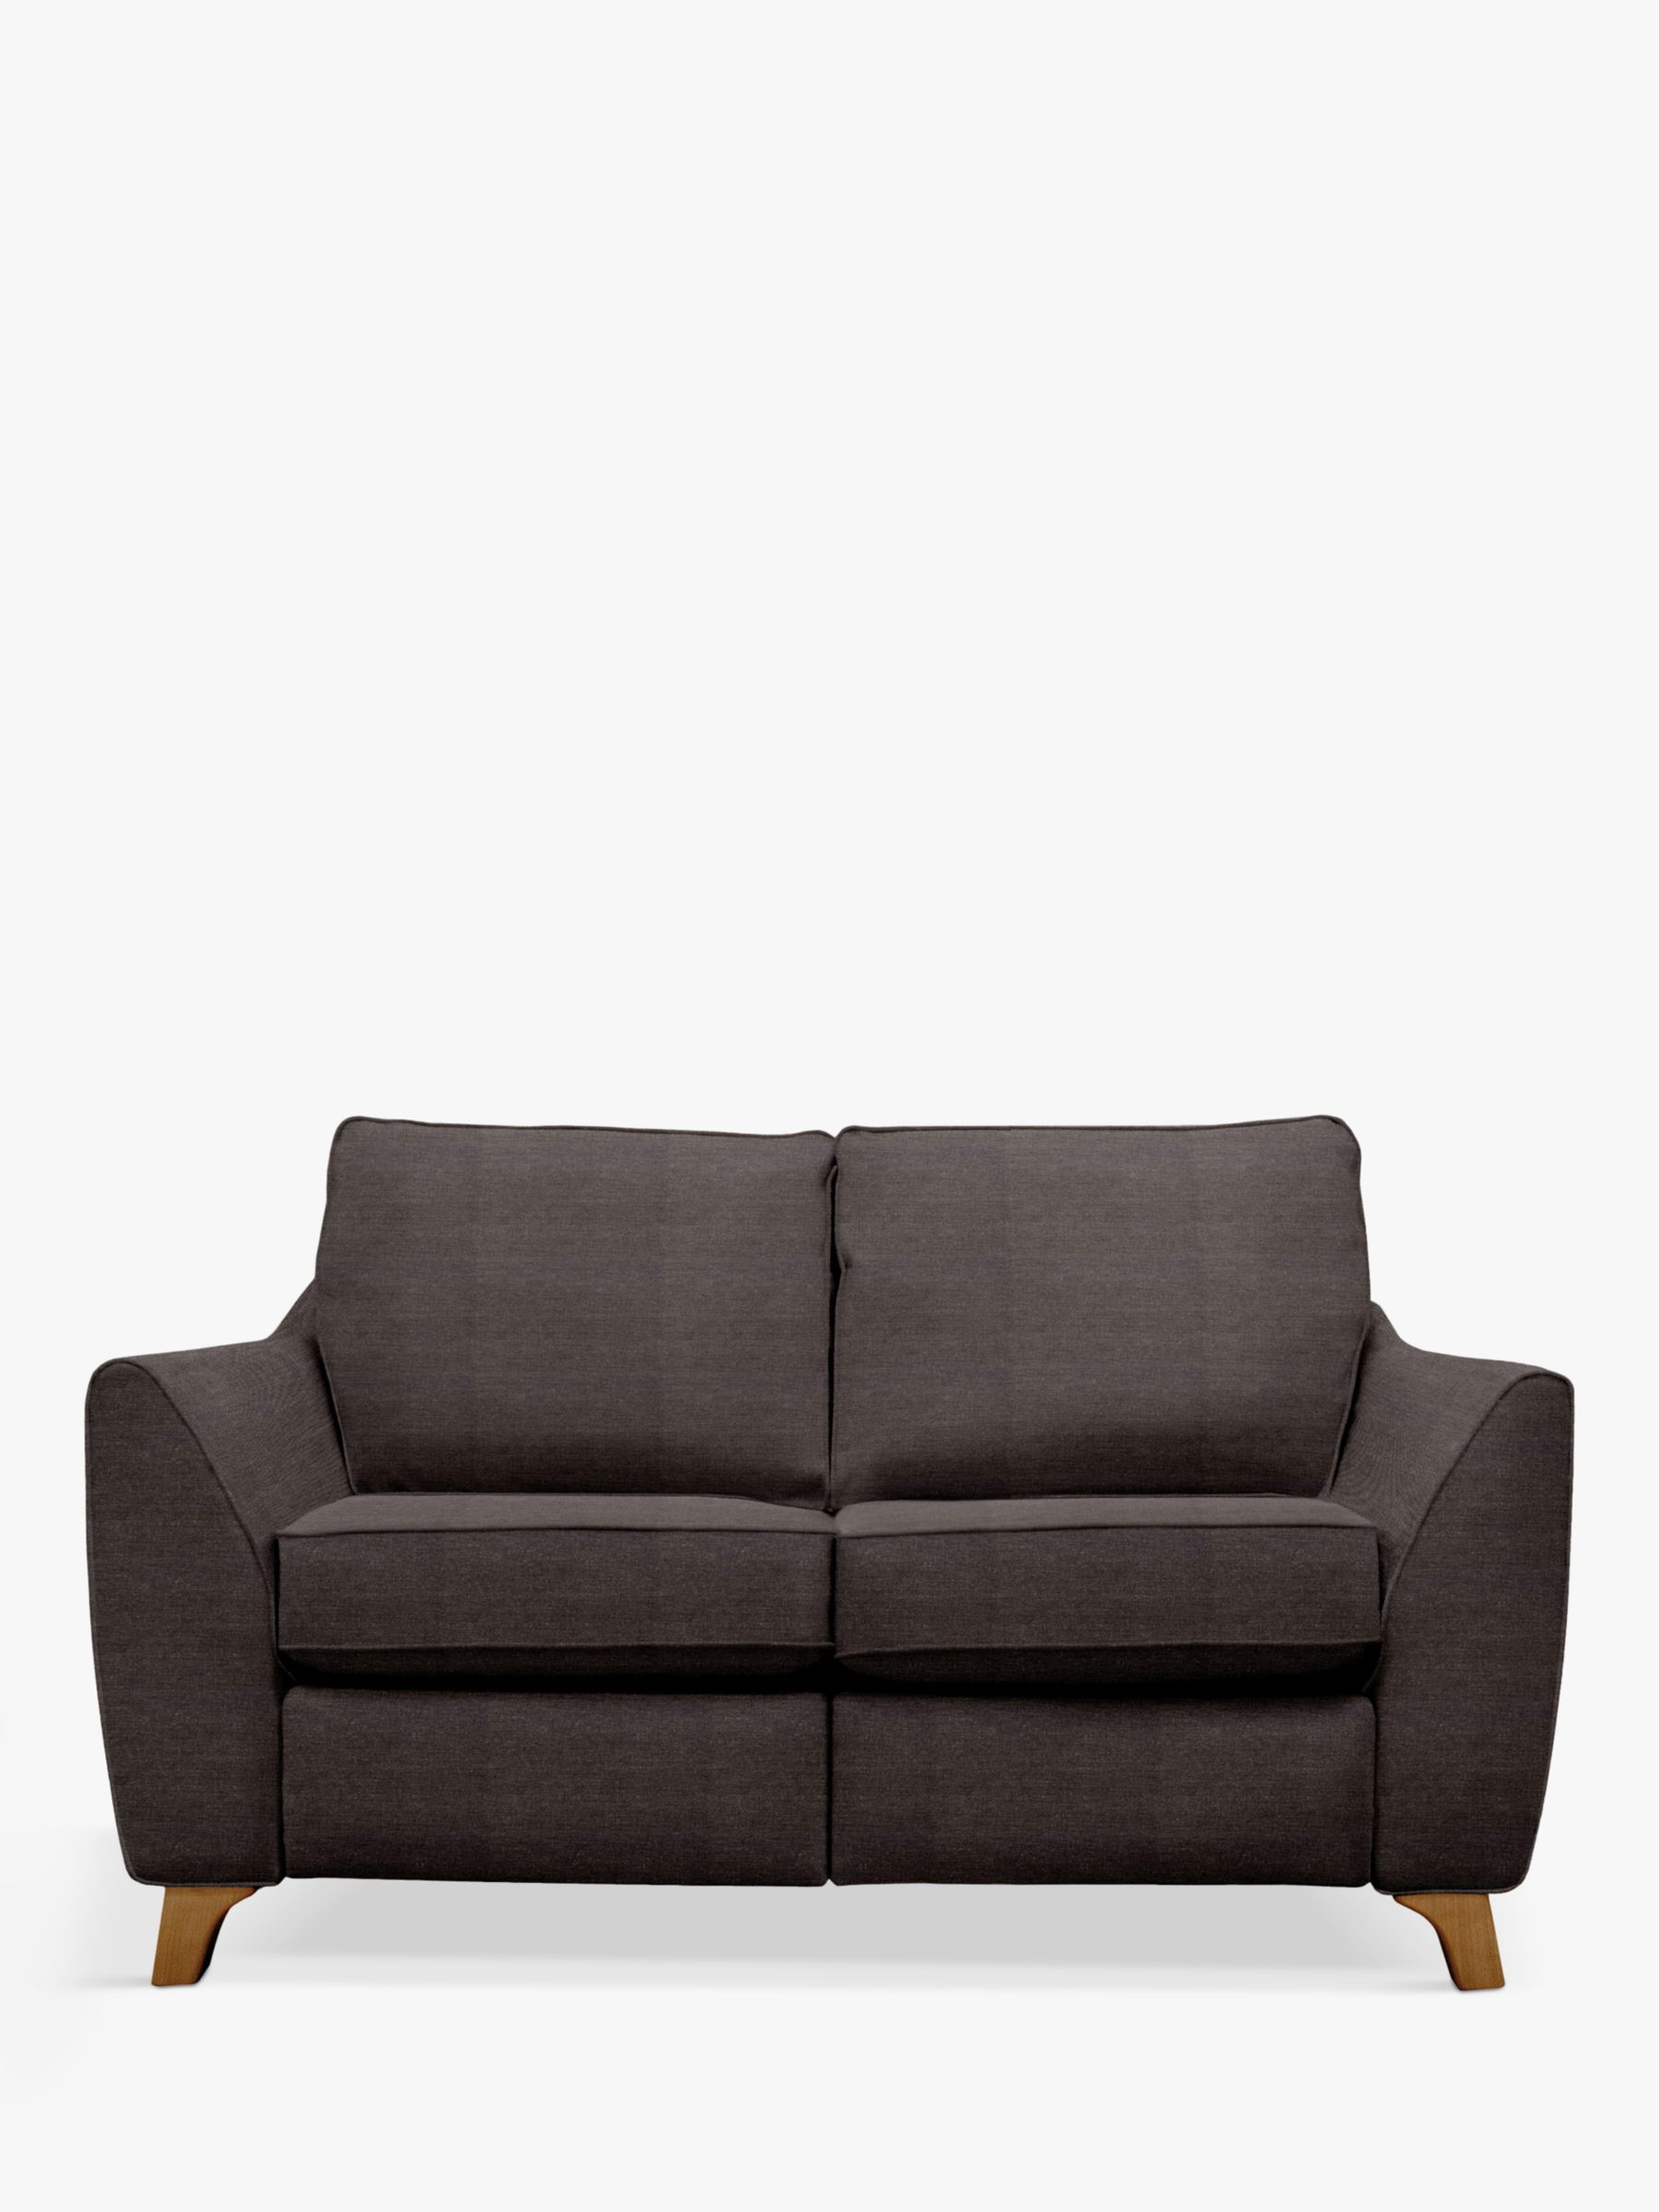 The Sixty Eight Range, G Plan Vintage The Sixty Eight Small 2 Seater Sofa, Tonic Charcoal